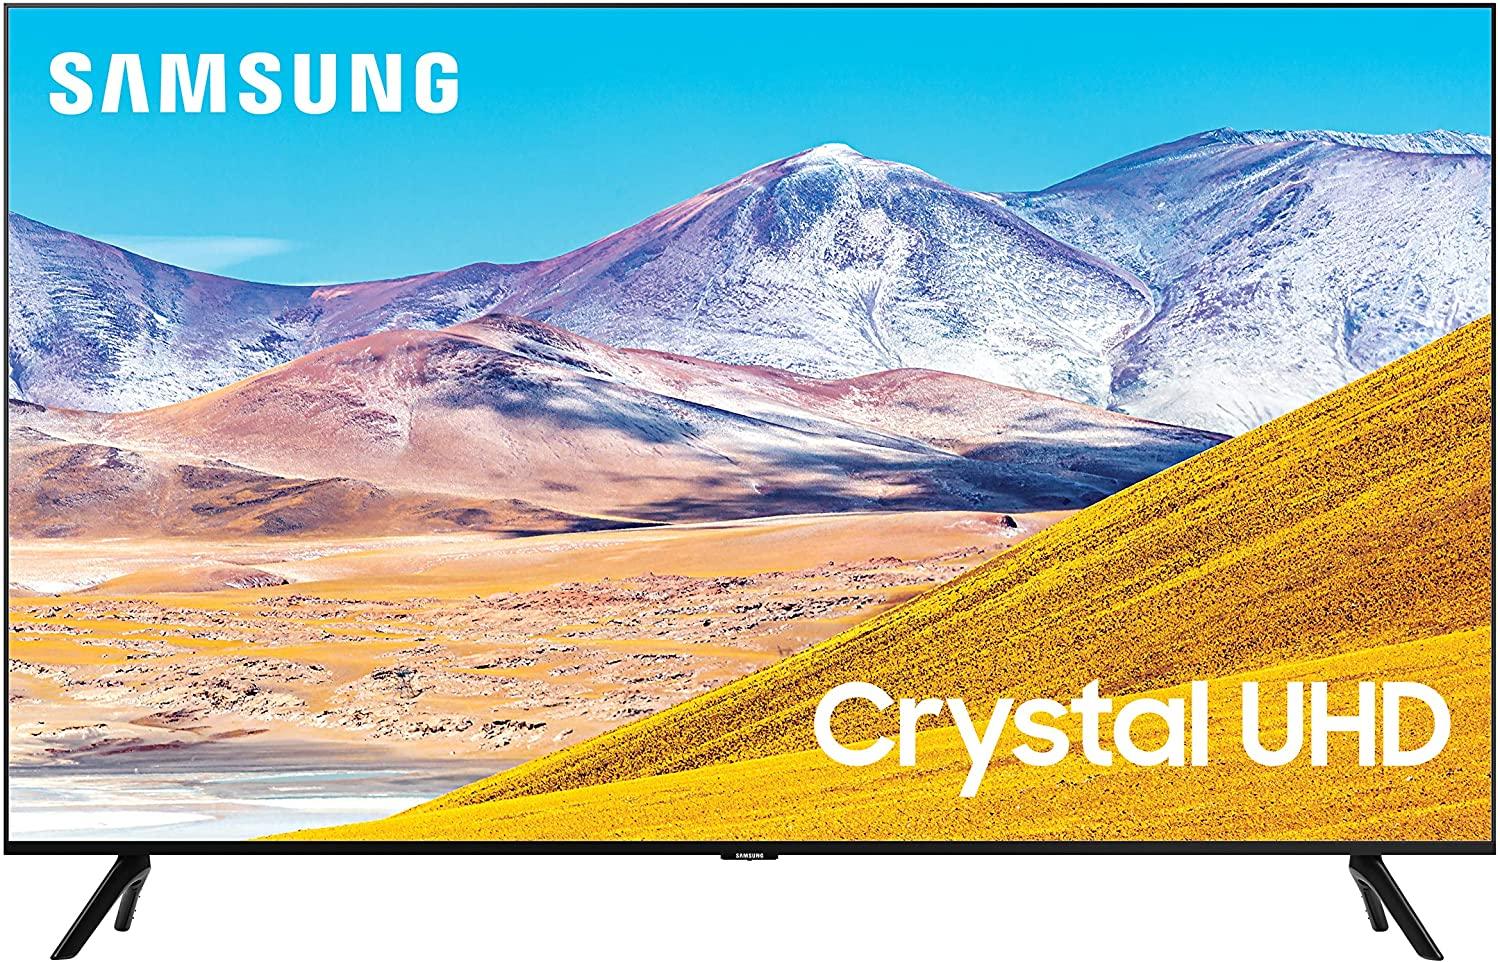 85in Class 8 Series LED 4K UHD Smart Tizen TV for $1597.99 Shipped